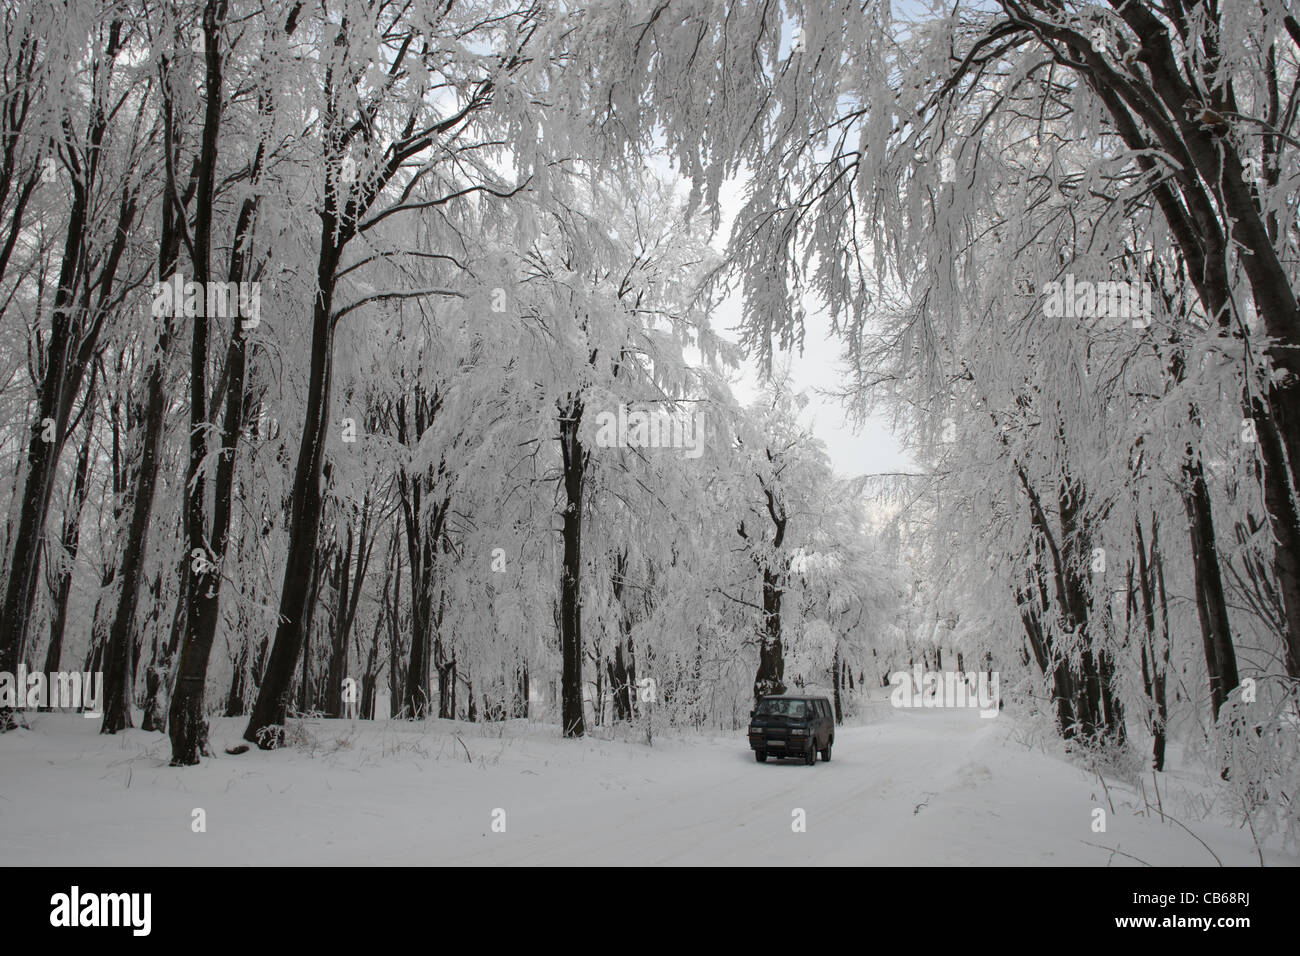 Forest. Winter scene with trees in snow and a van. Central Balkan National Park. Bulgaria Stock Photo